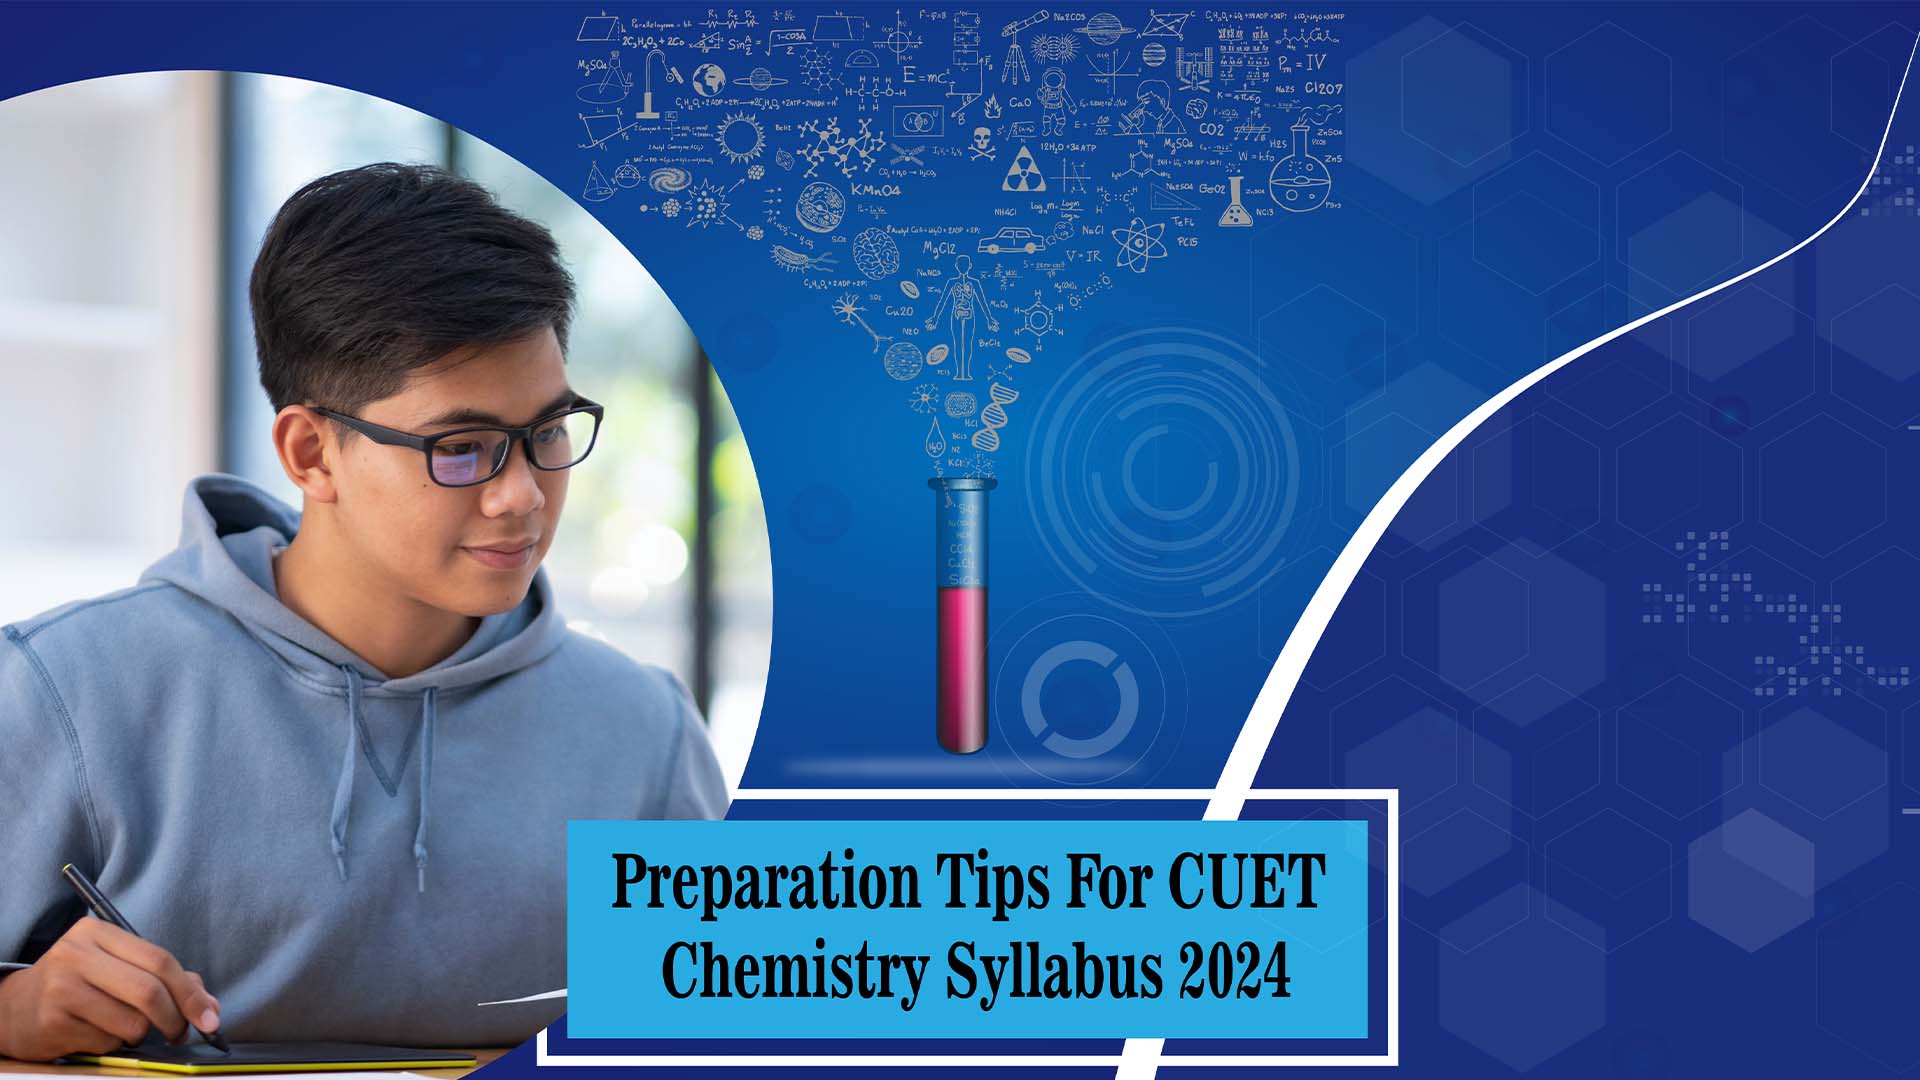 Preparation Tips For CUET Chemistry Syllabus 2024 - Physical, Inorganic & Organic Chemistry